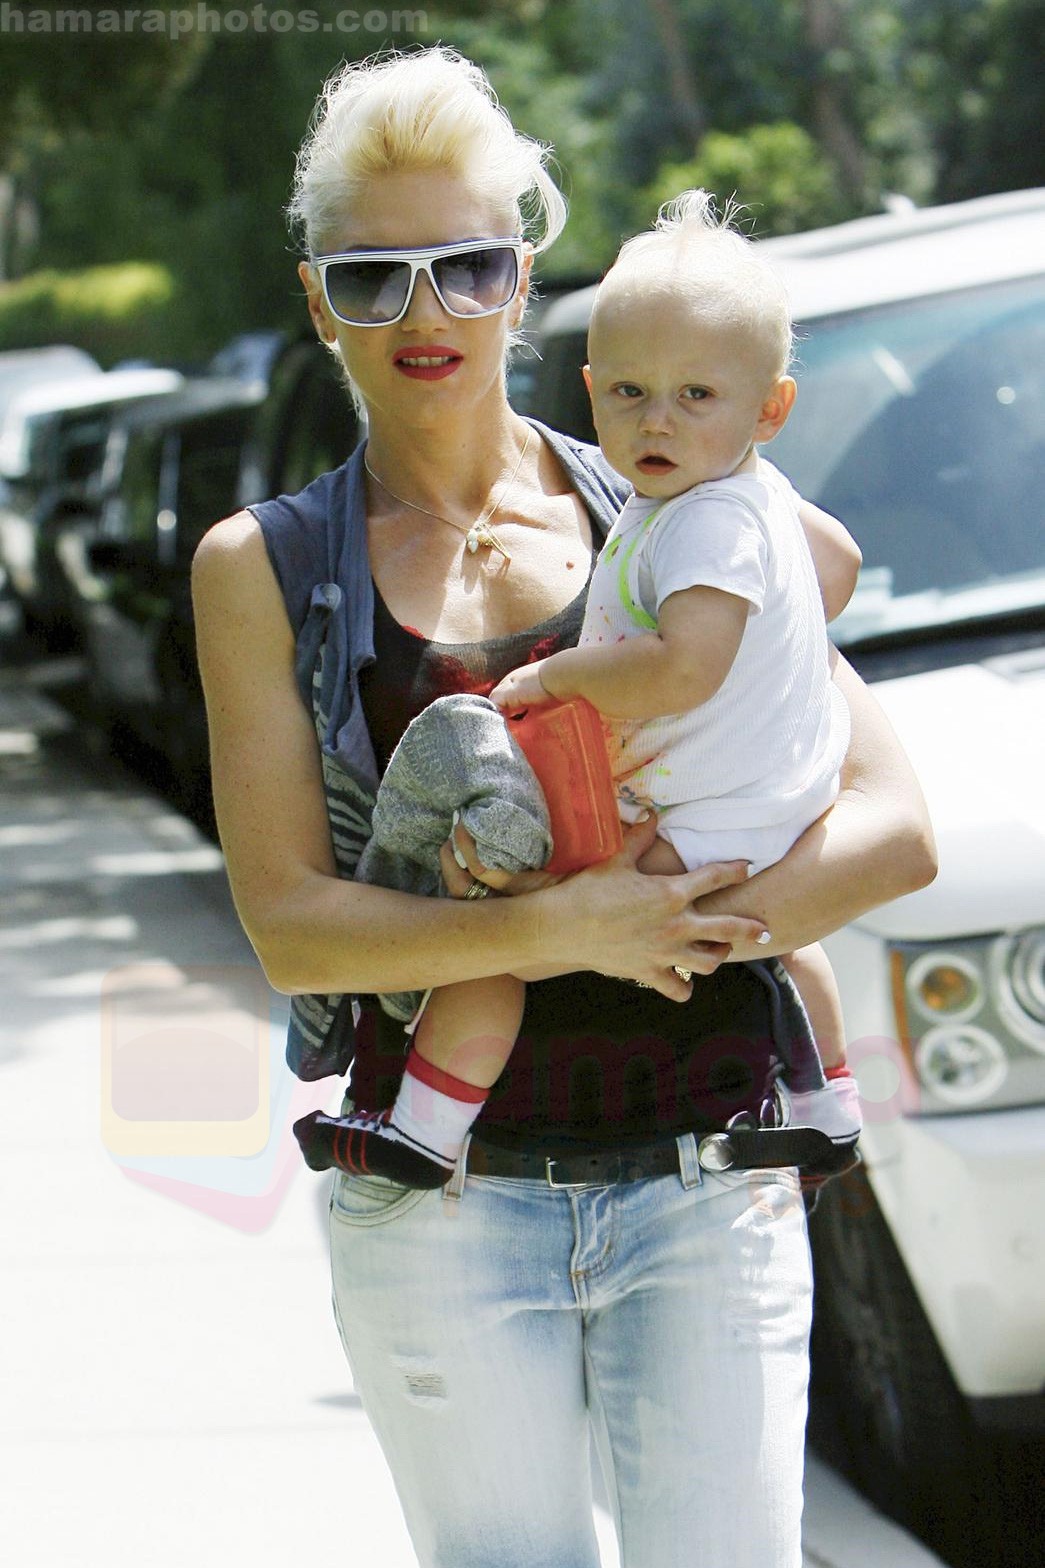 Gwen Stefani and her daughter Zuma goes shopping at Bristol Farms then stop by the park to change Zuma on 22-08-09